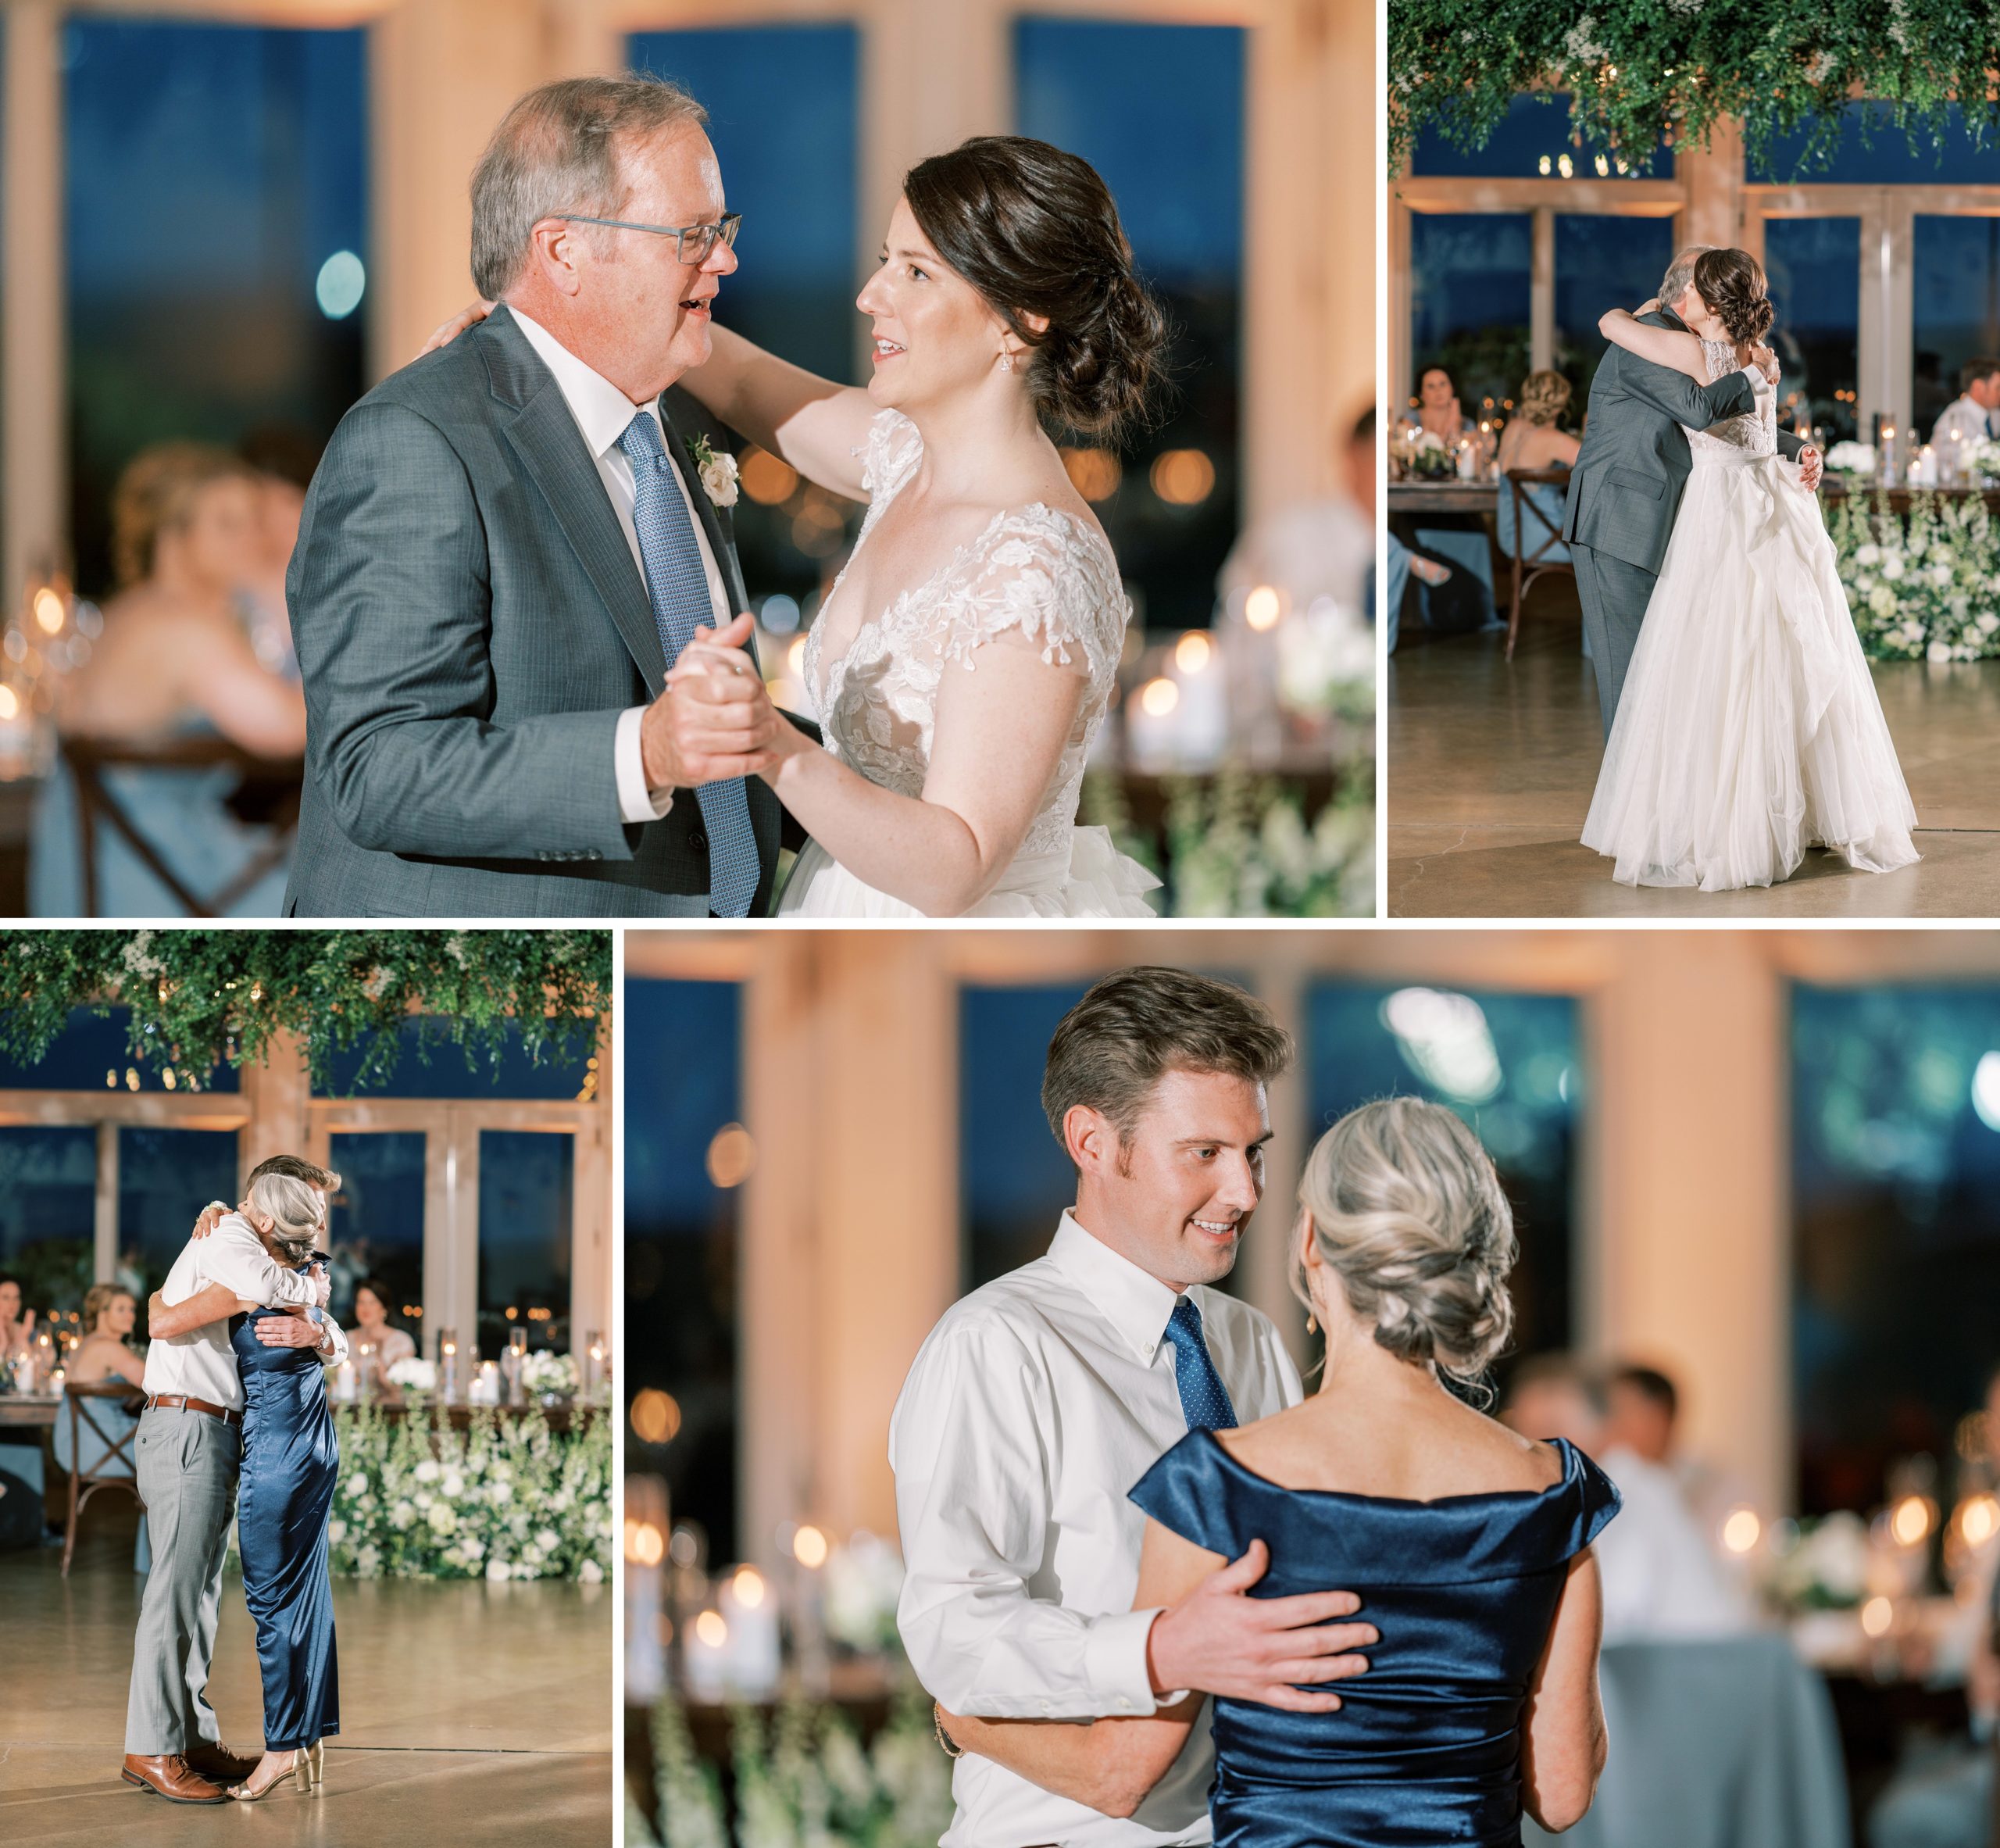 A beautiful spring wedding at Stone Tower Winery in Leesburg, VA is captured by DC film photographer, Alicia Lacey.